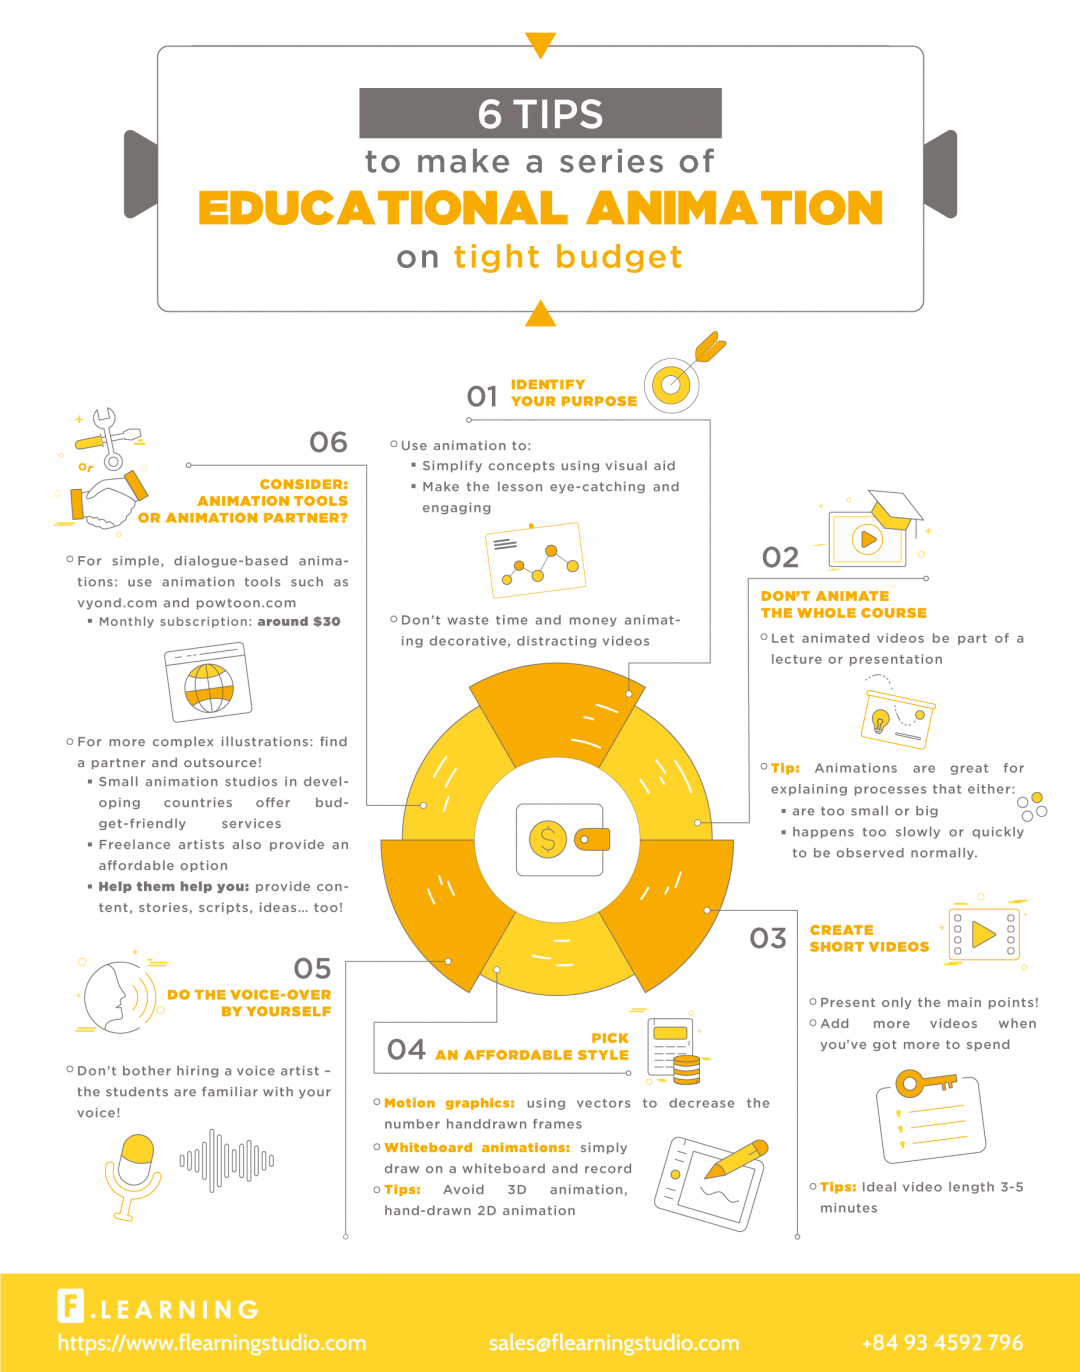 How To Create A Series Of Educational Animation On A Budget